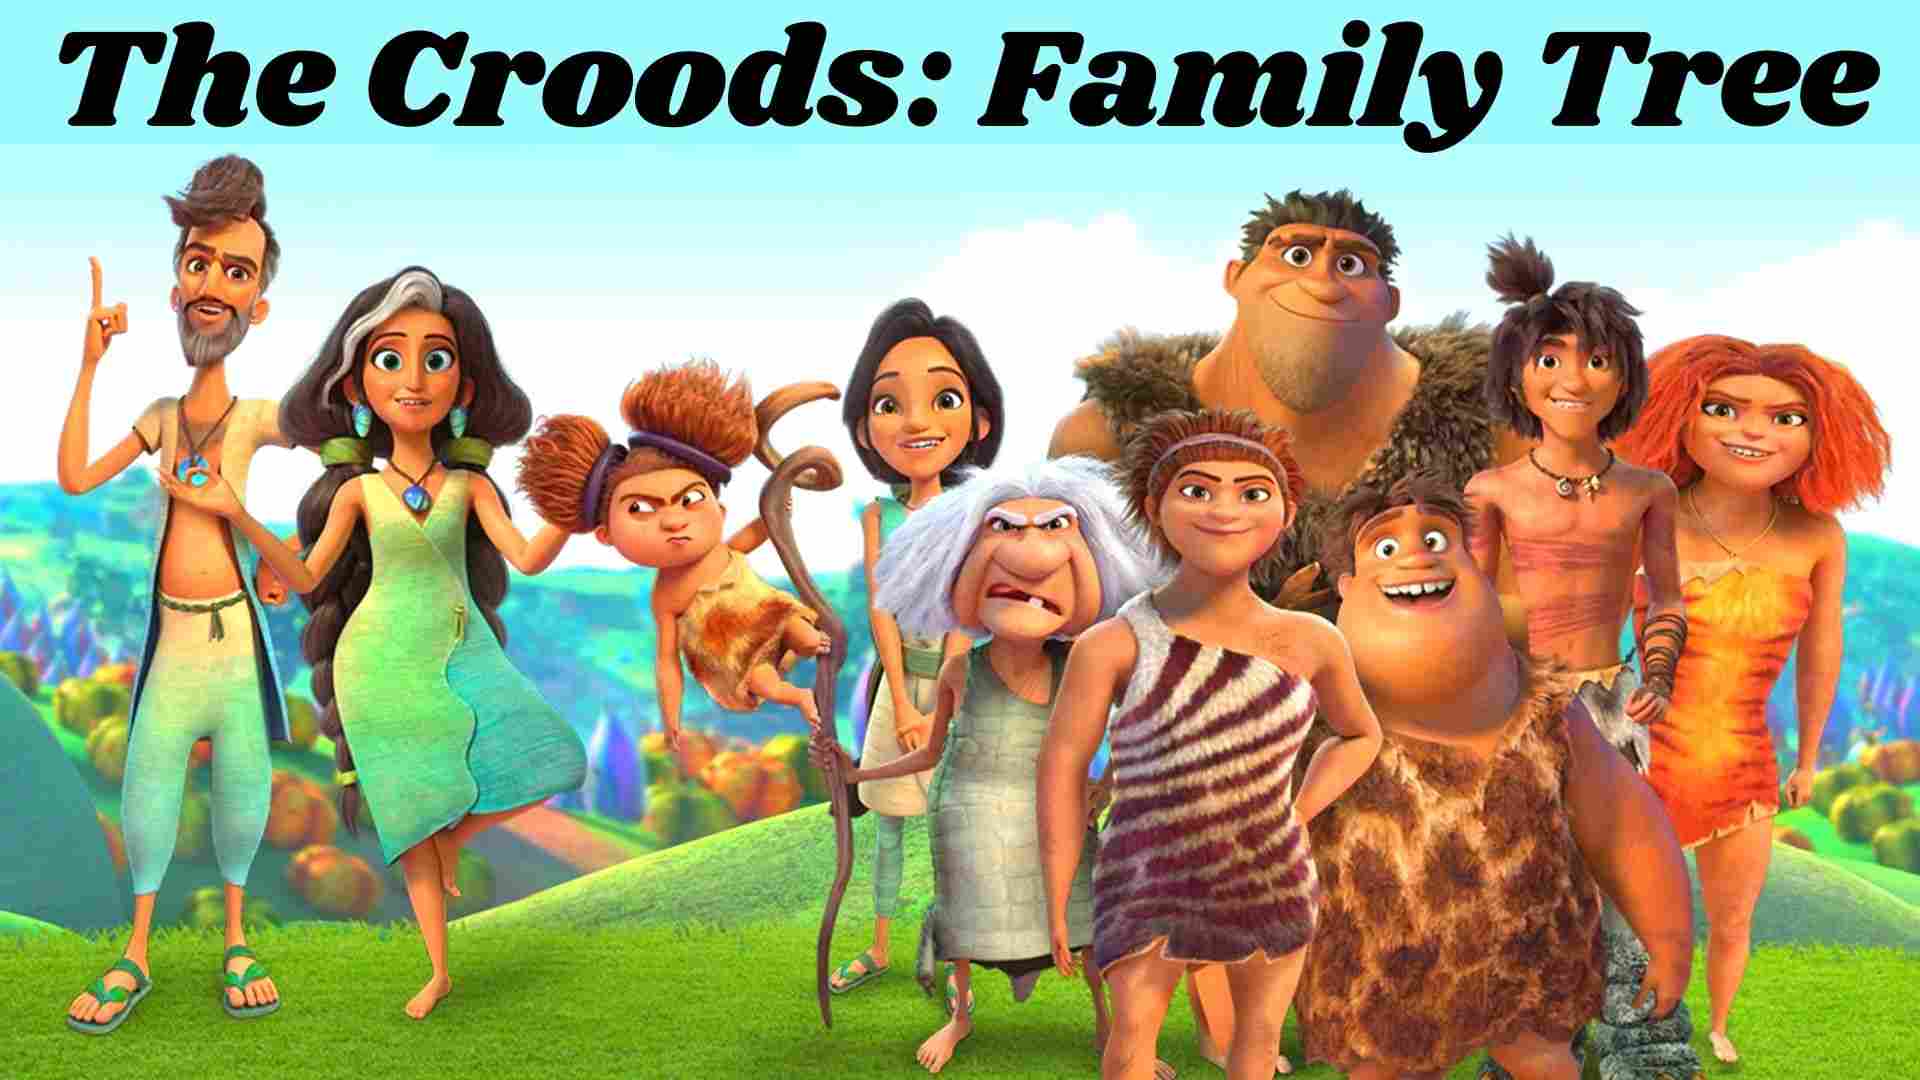 The Croods: Family Tree Parents guide and Age Rating | 2022